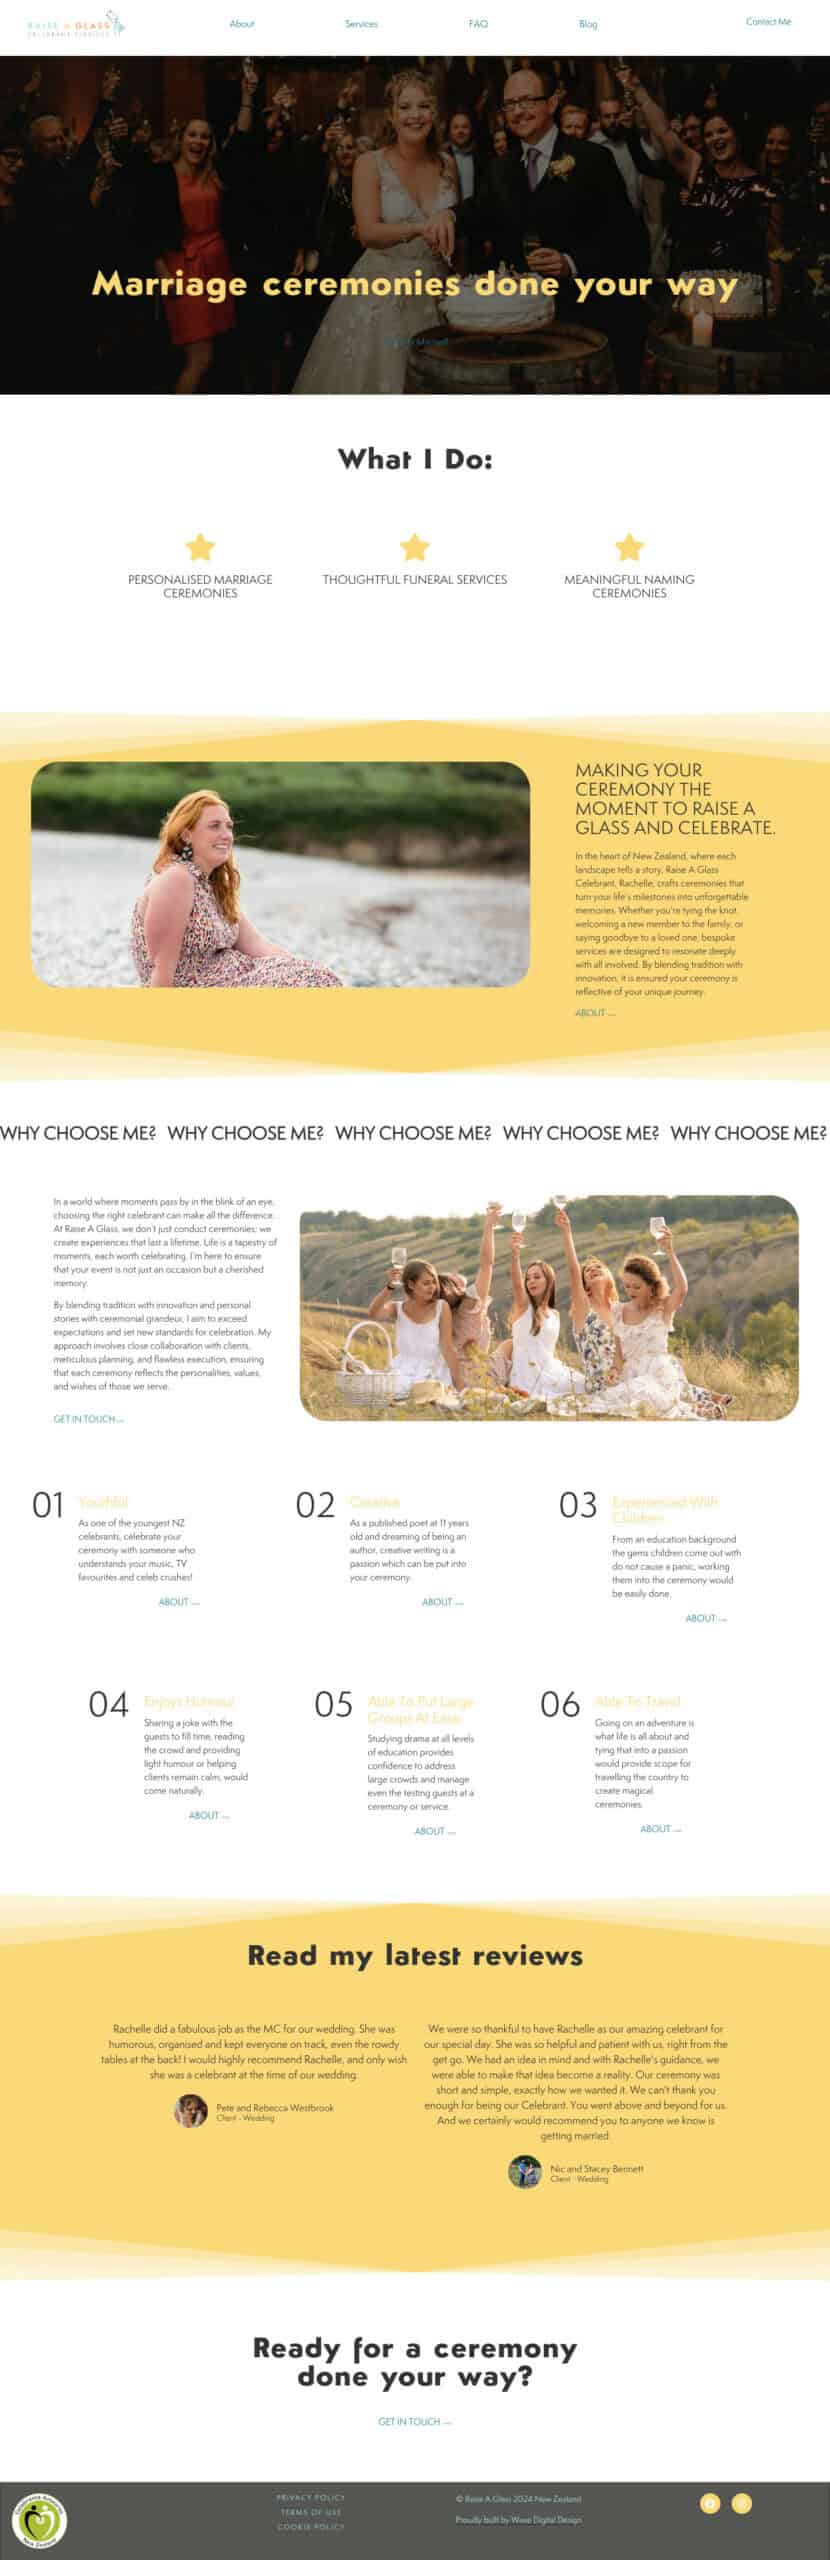 A webpage layout for a wedding celebrant’s services, featuring sections titled "Ceremony ceremonies done your way", a diverse wedding photo, three personal service offers, reasons to choose her, and customer reviews.